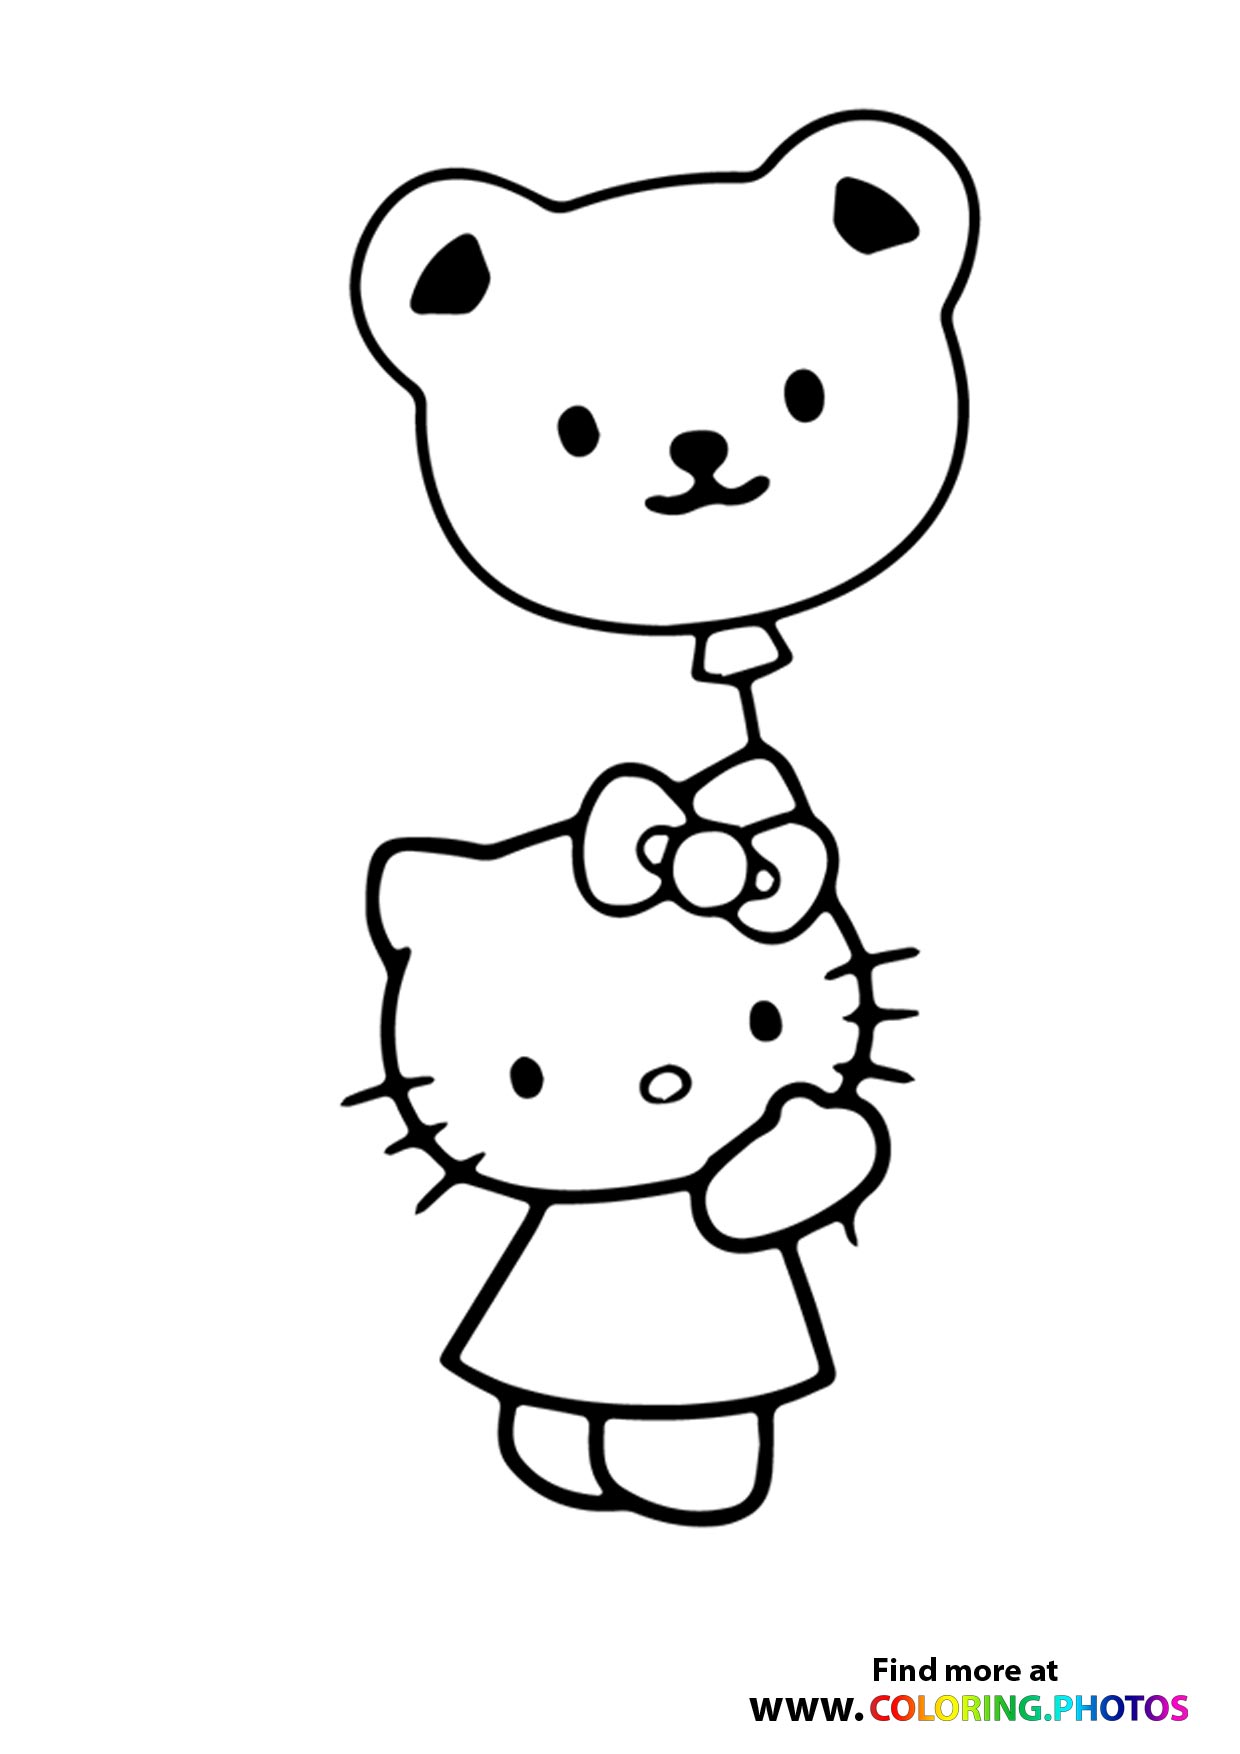 Hello Kitty doctor - Coloring Pages for kids